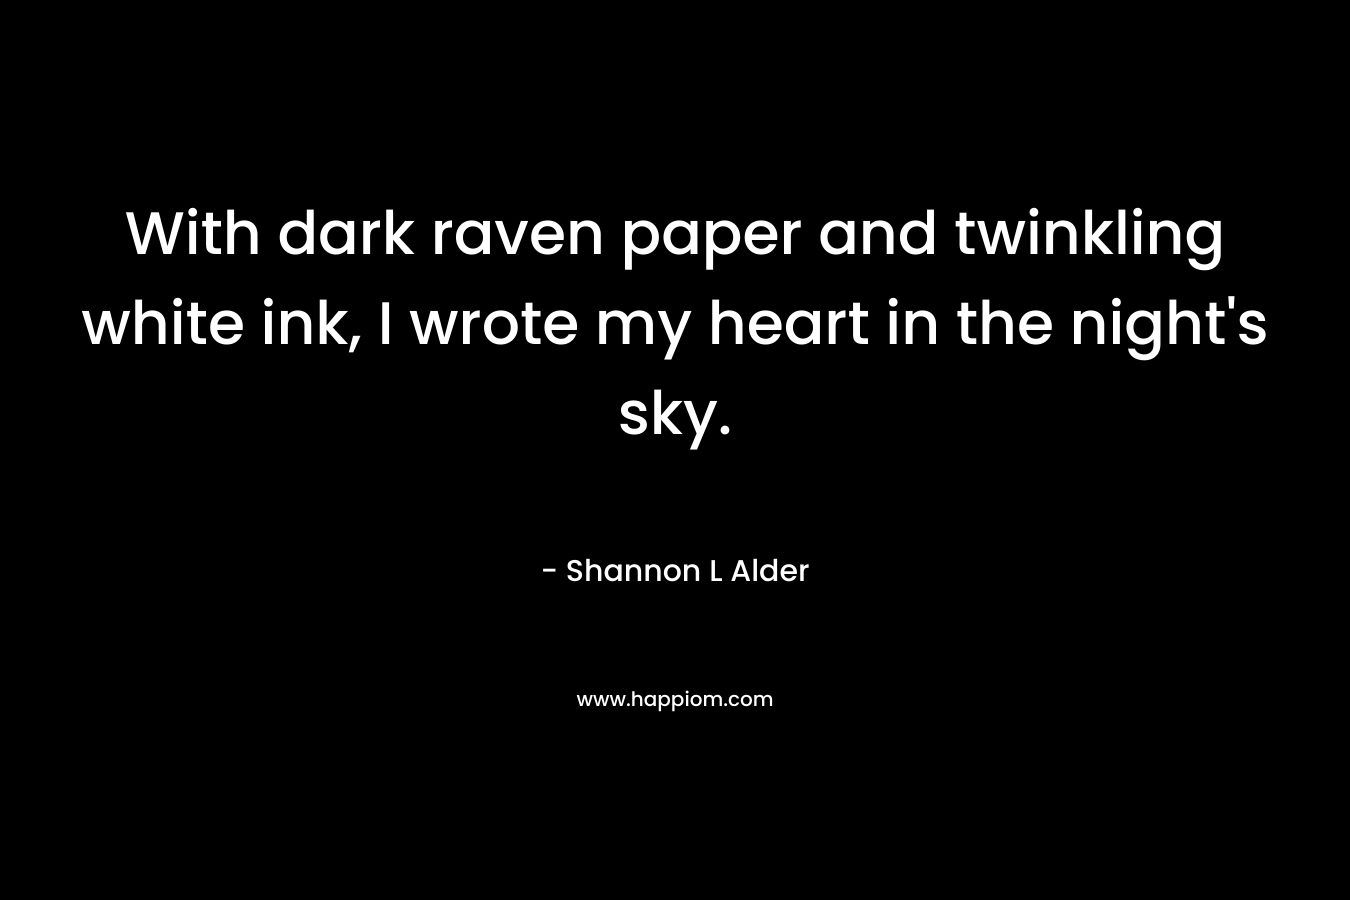 With dark raven paper and twinkling white ink, I wrote my heart in the night’s sky. – Shannon L Alder